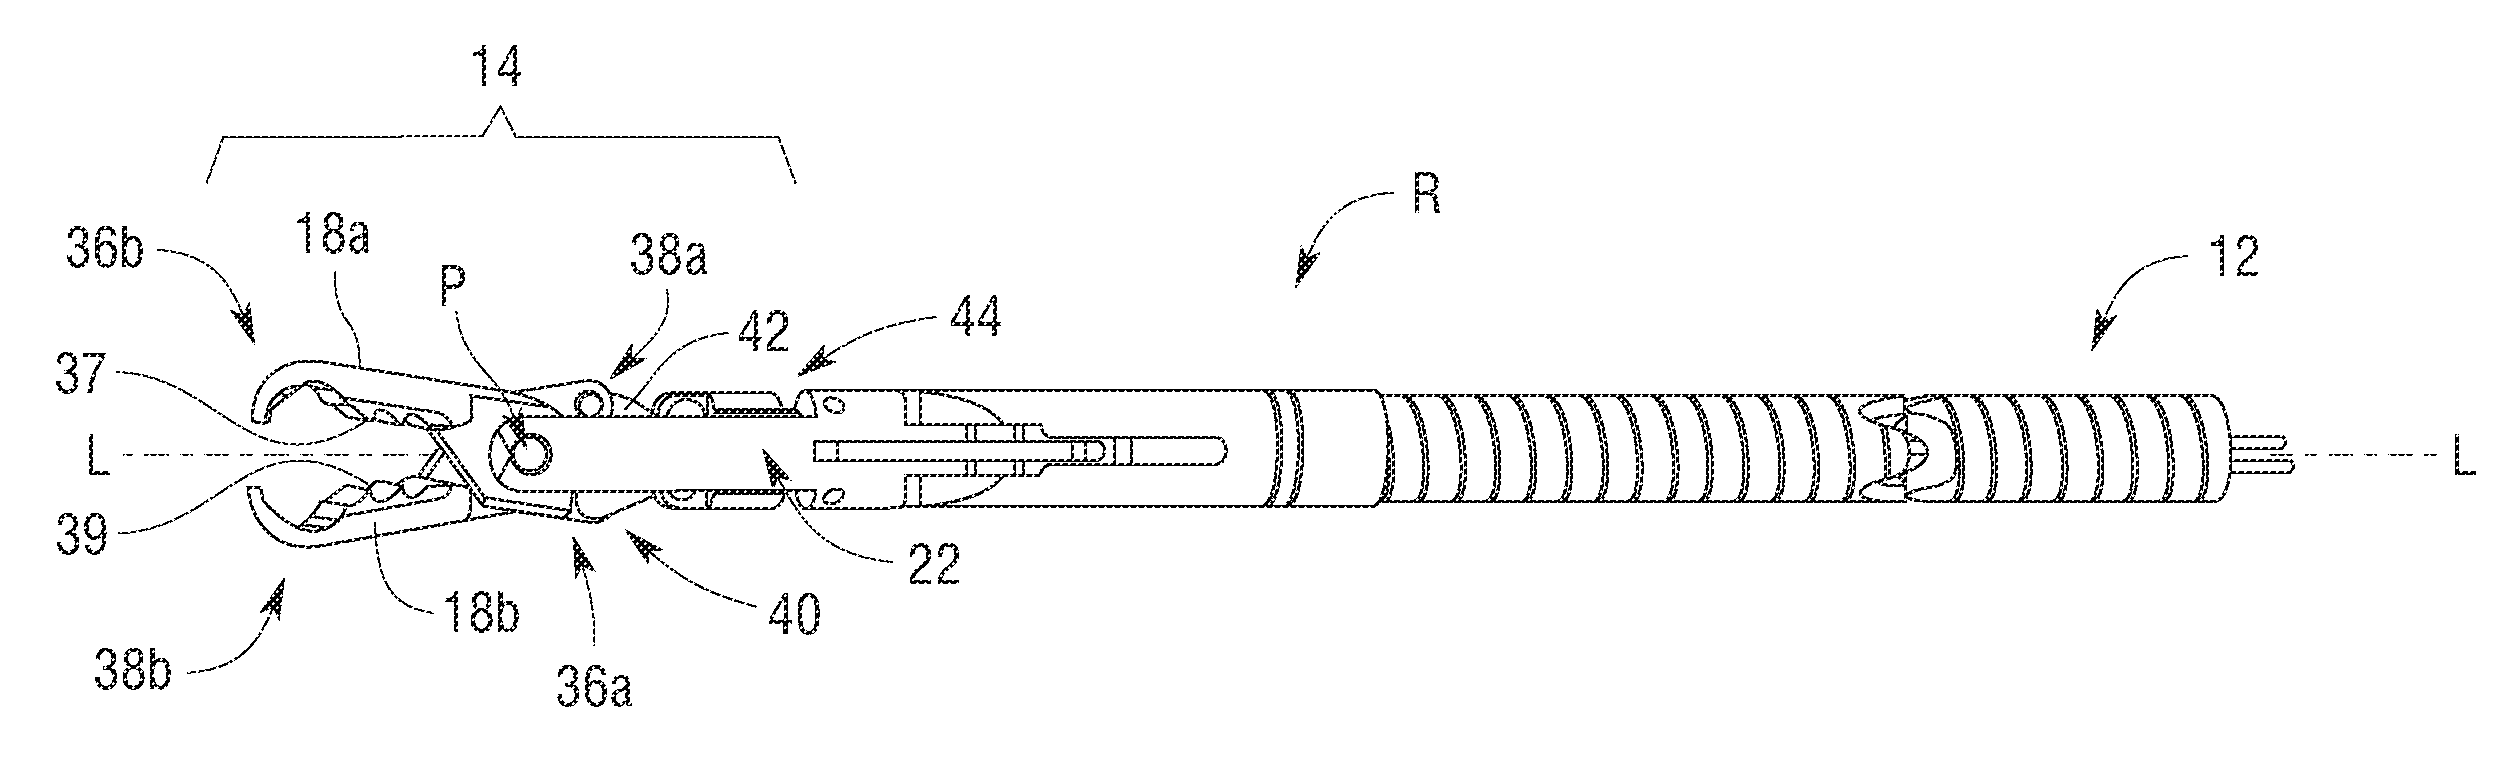 Rotational coupling device for surgical instrument with flexible actuators